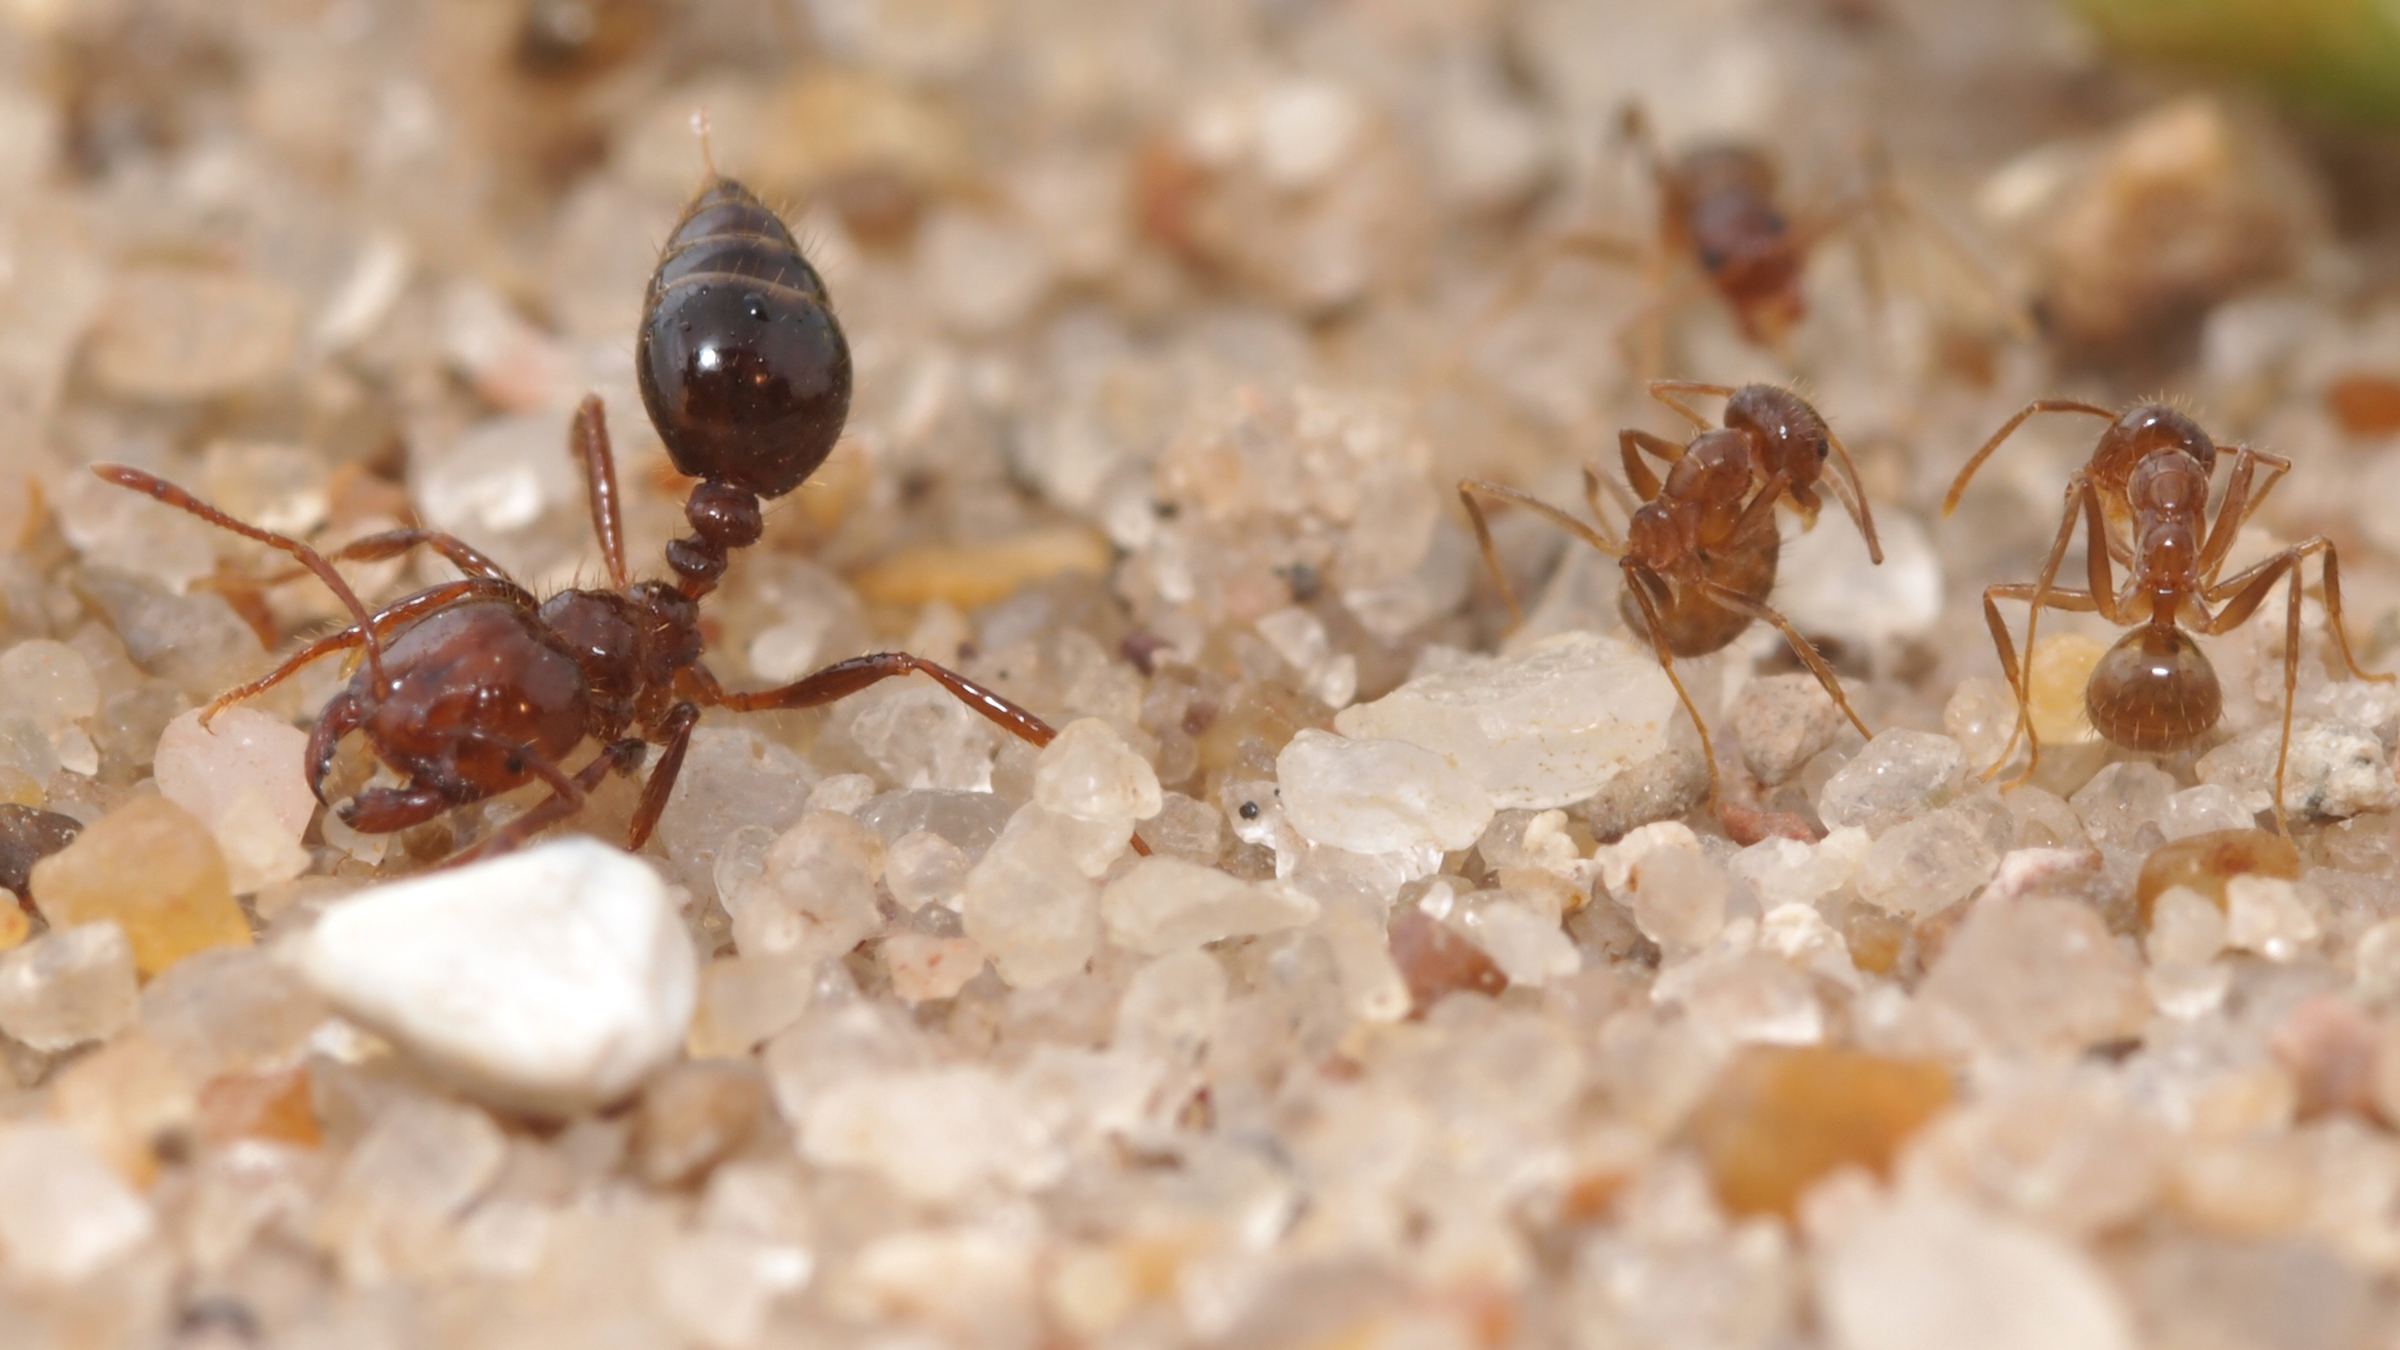 One large ant with its hindquarters raised in the direction of smaller ants